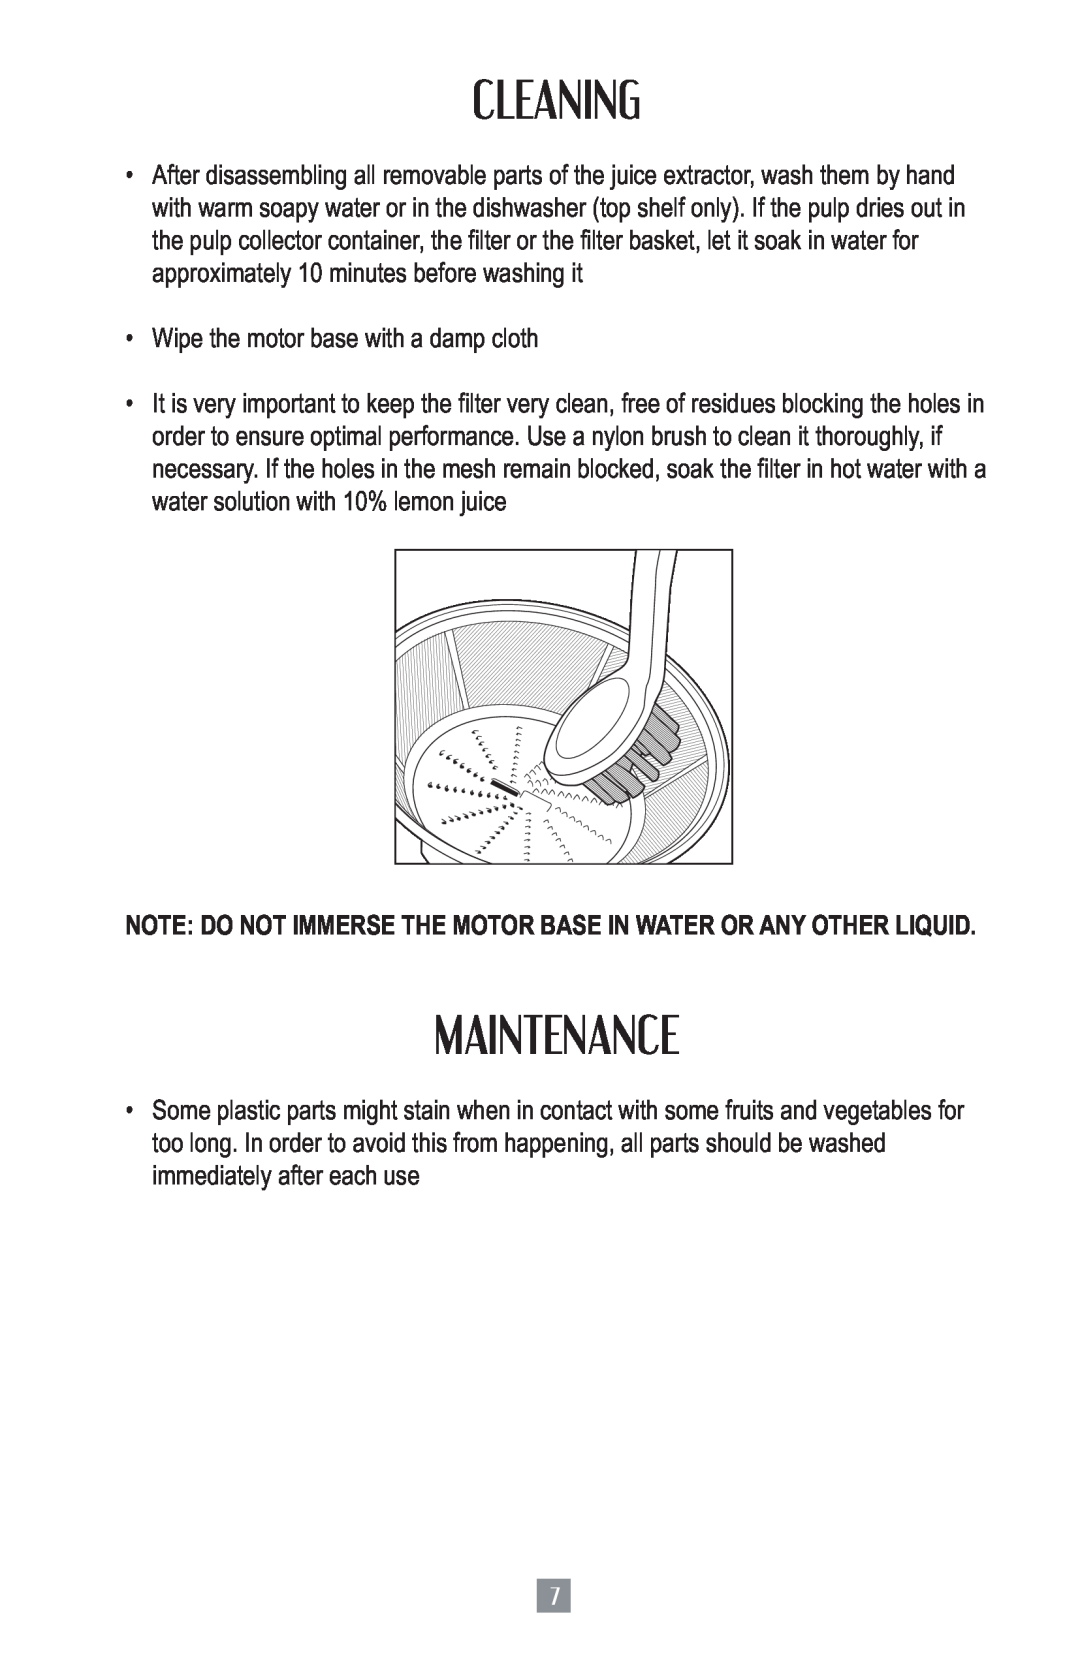 Oster 3157 instruction manual Cleaning, Maintenance, Wipe the motor base with a damp cloth 